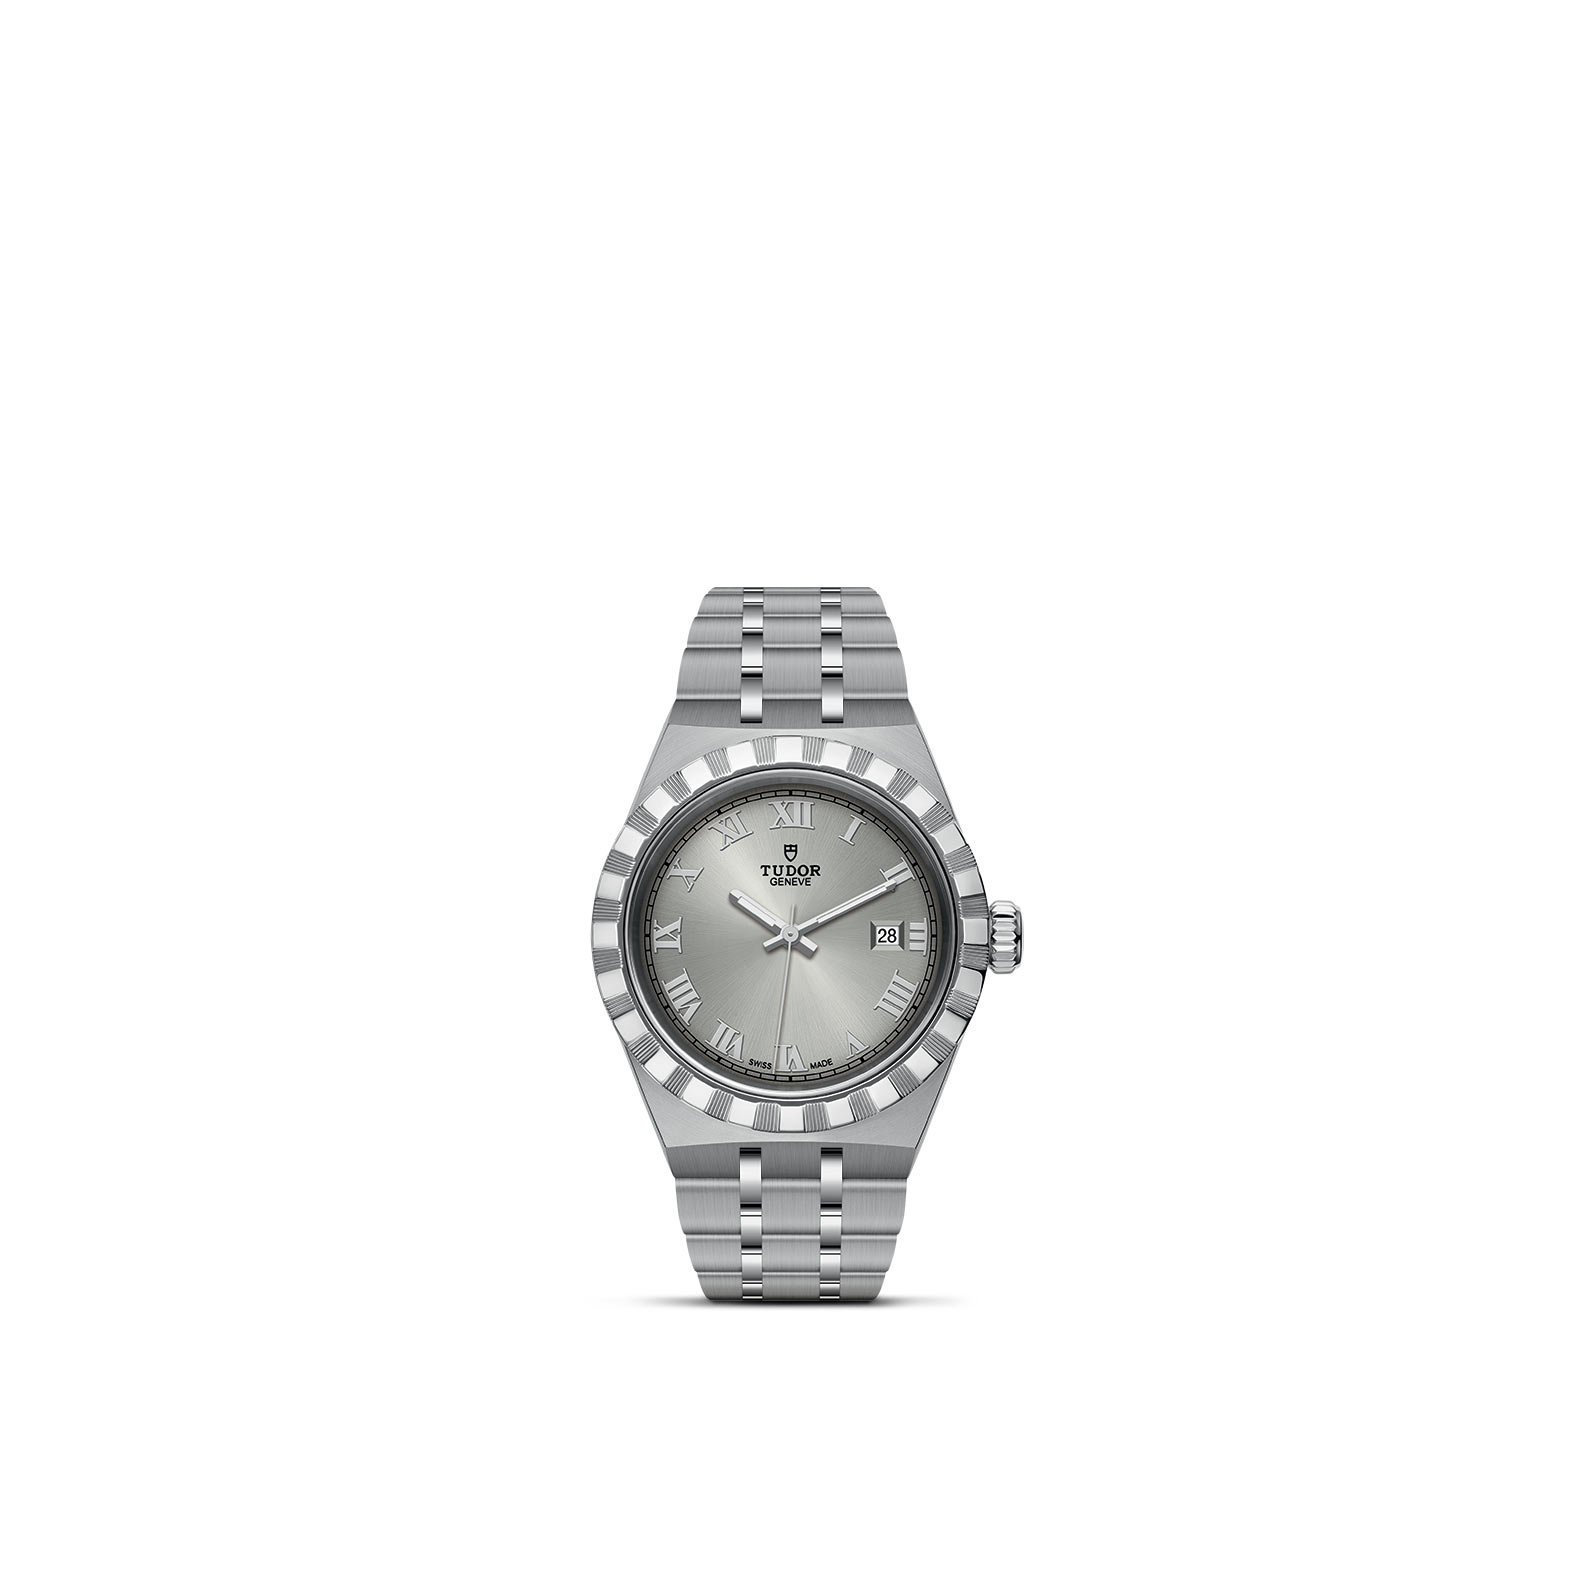 TUDOR TUDOR ROYAL standing upright, highlighting its classic design against a white background.